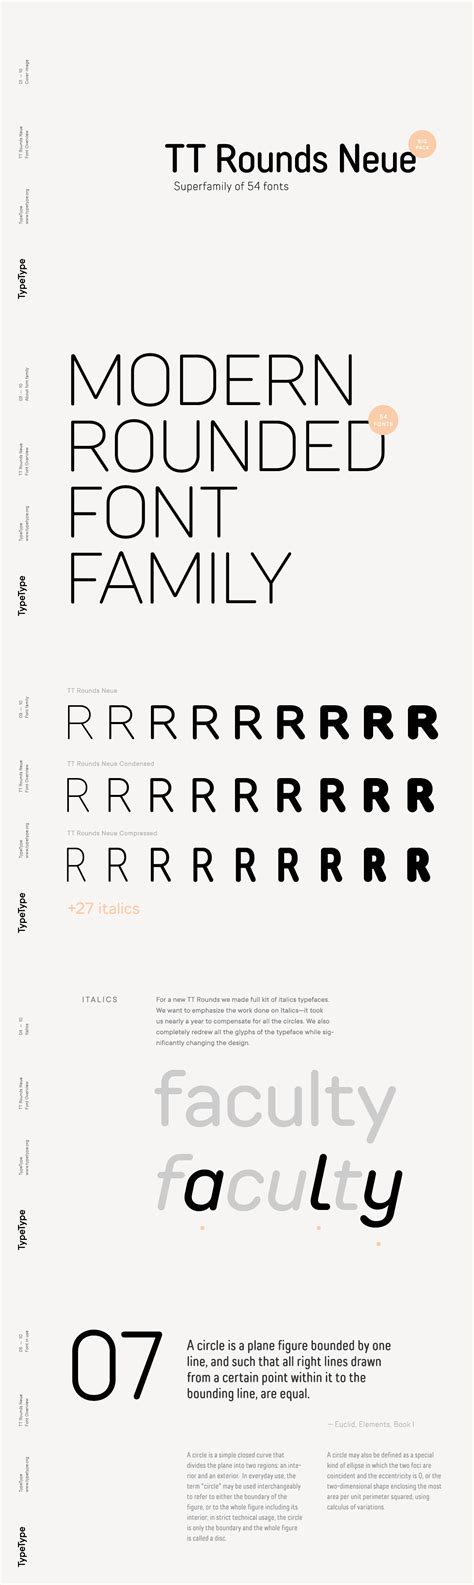 Tt rounds neue шрифт  TT Rounds Neue Compressed Black Font Free found by TypeType